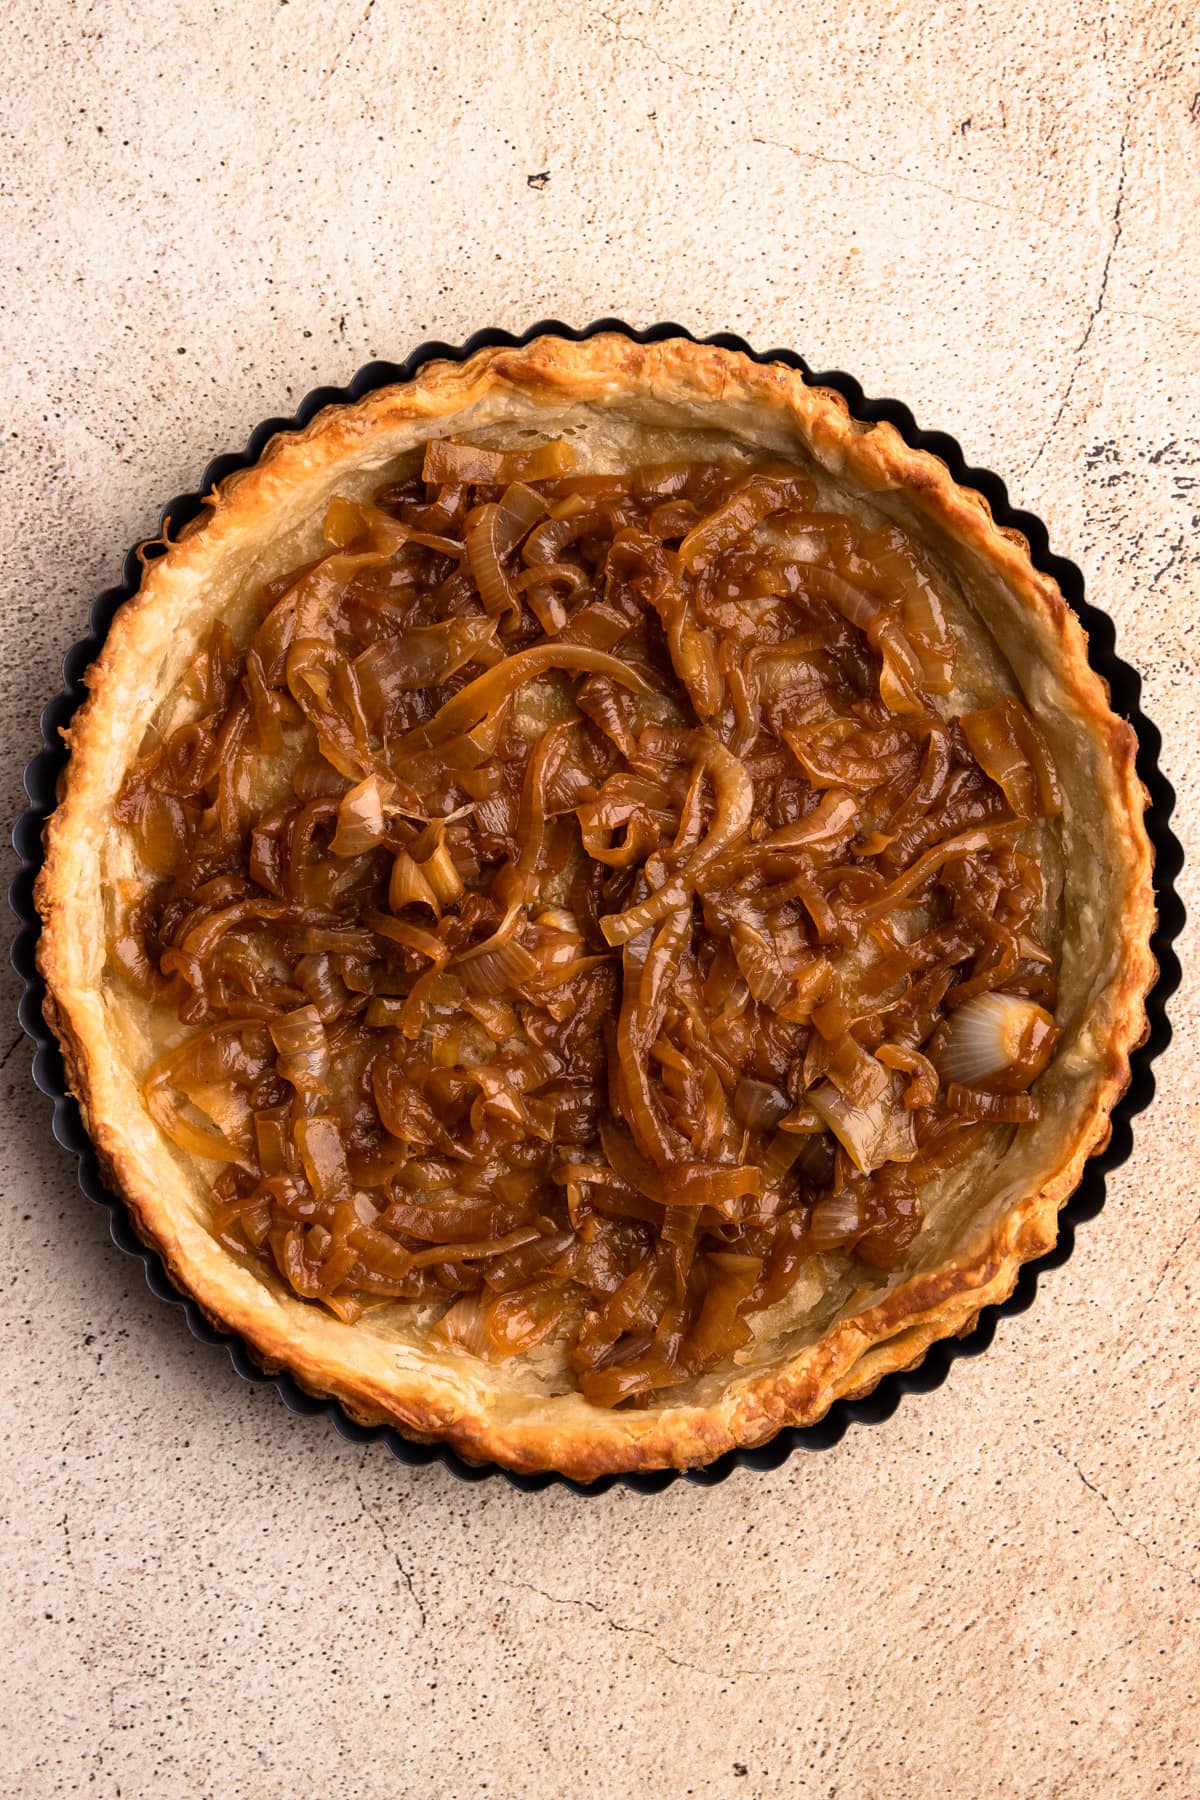 Caramelized onions in a baked pie shell.